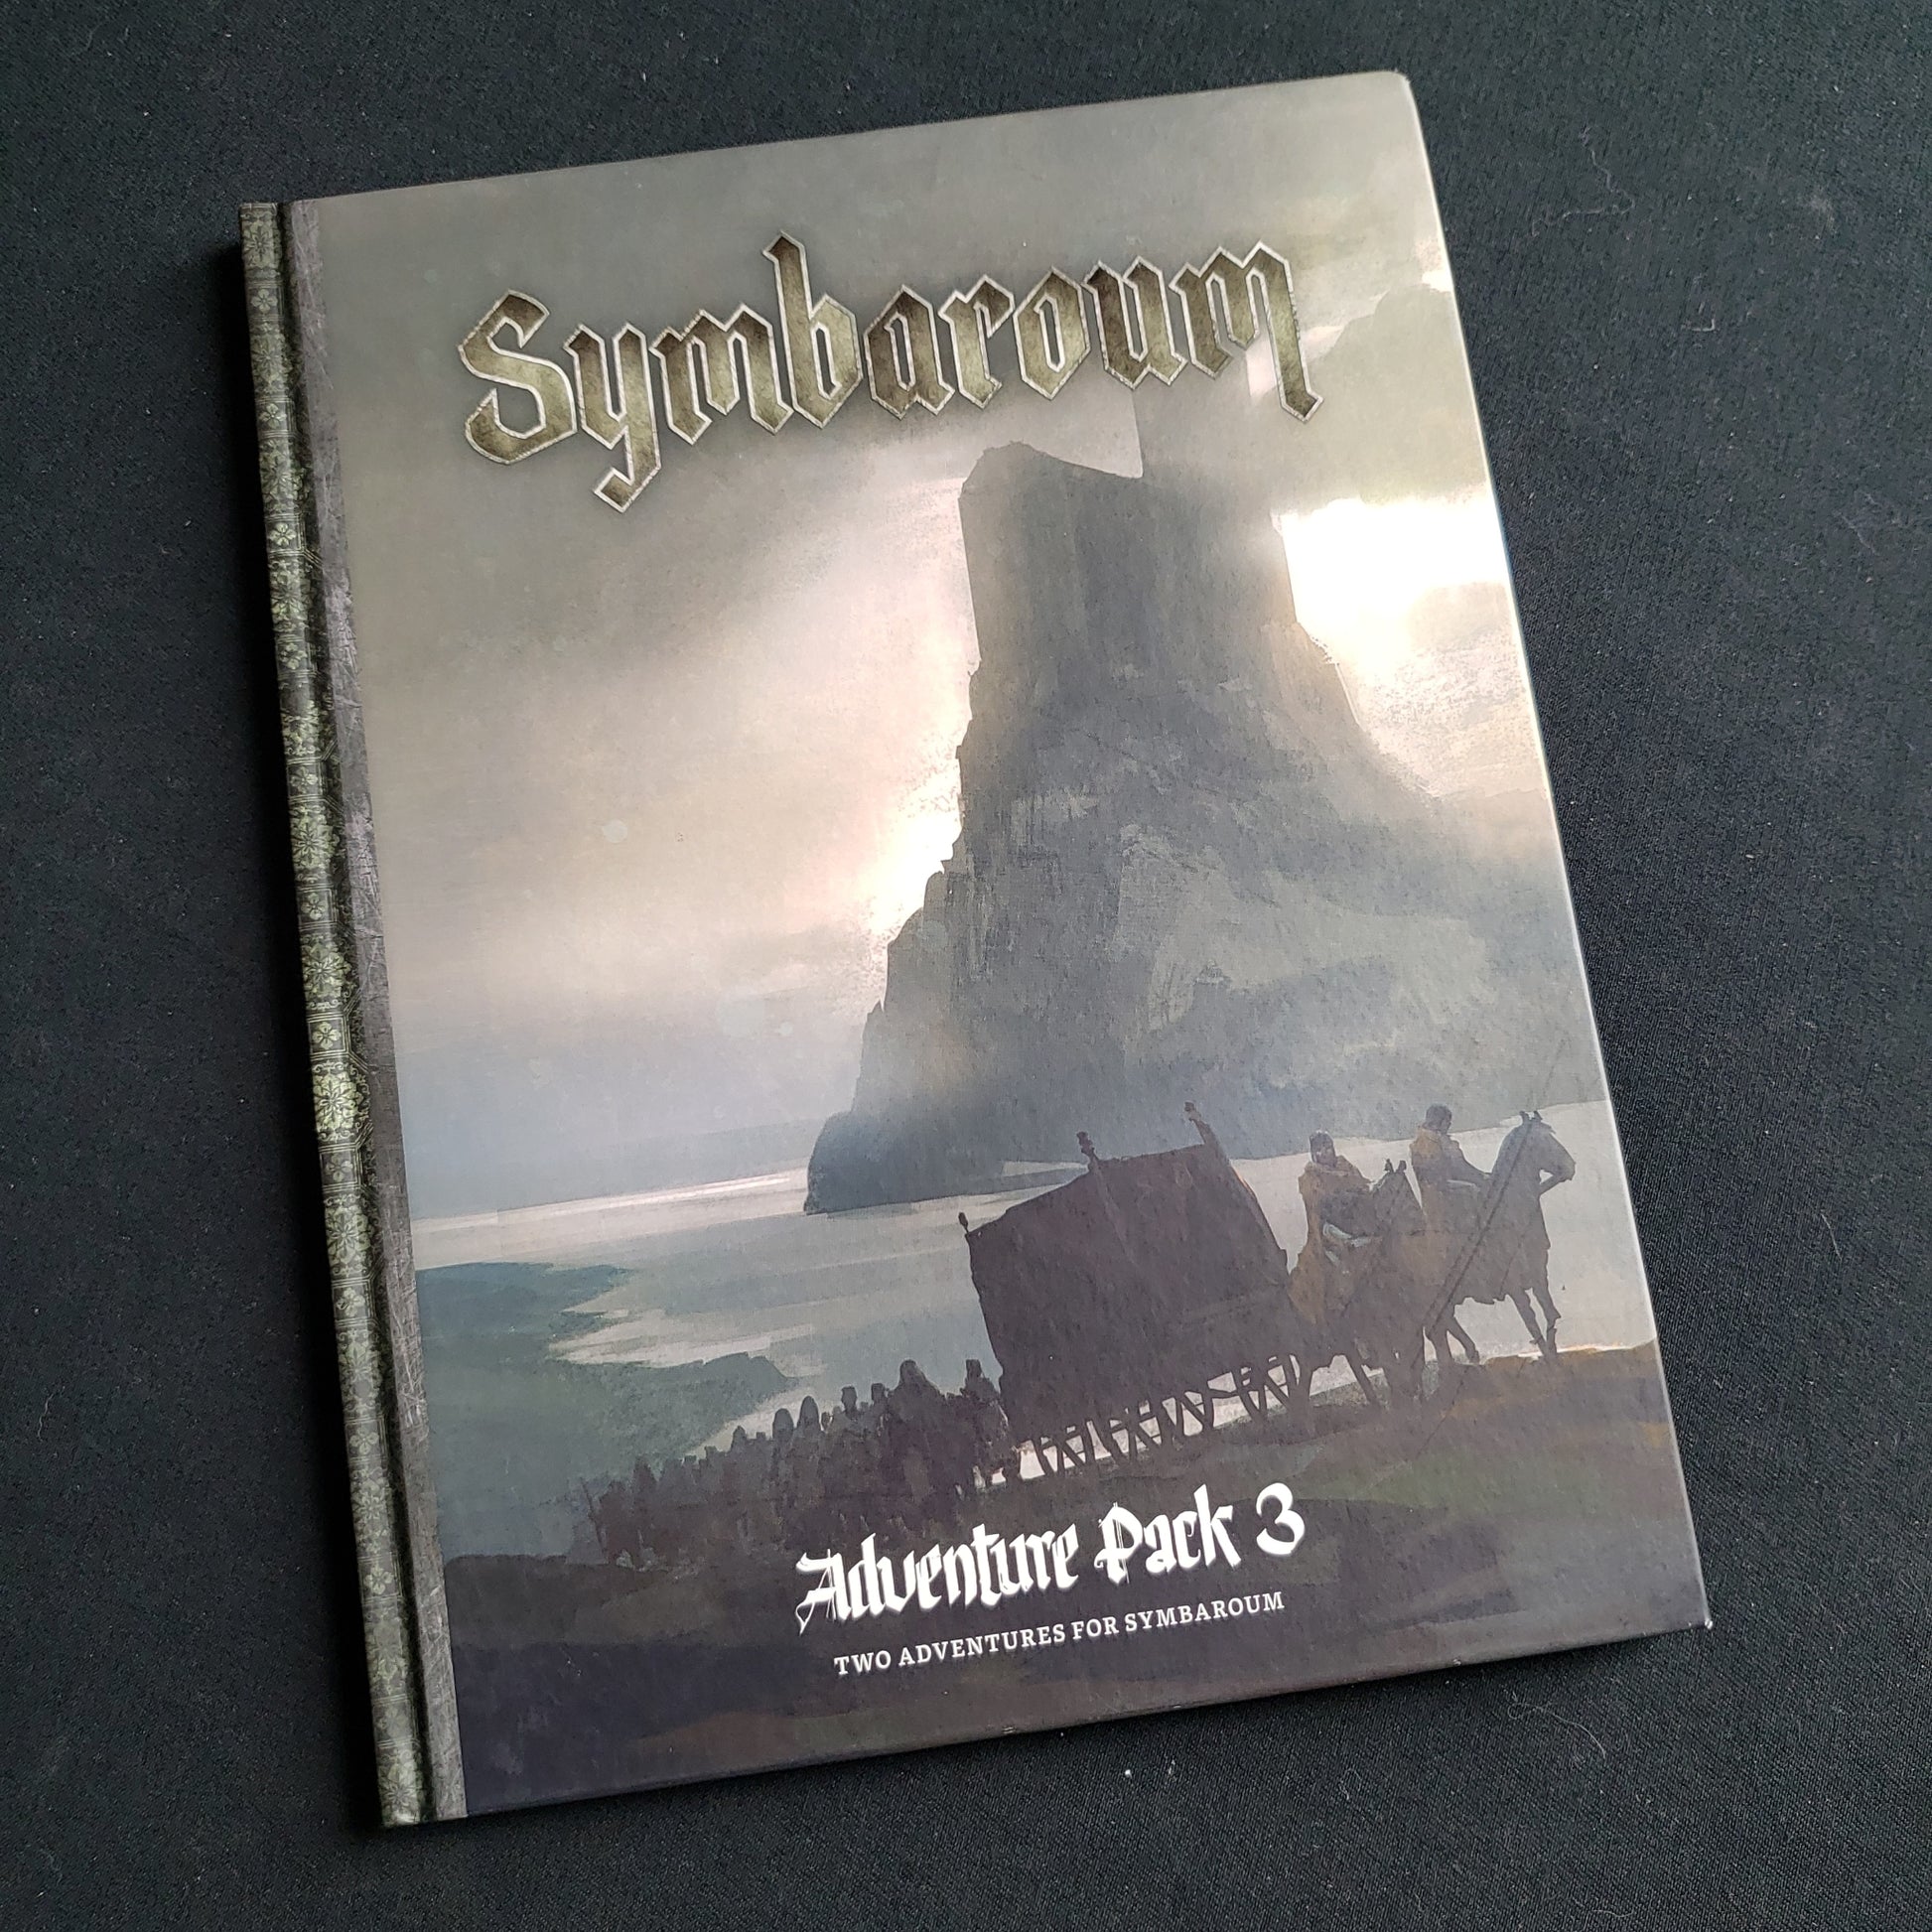 Image shows the front cover of the Adventure Pack 3 book for the Symbaroum roleplaying game